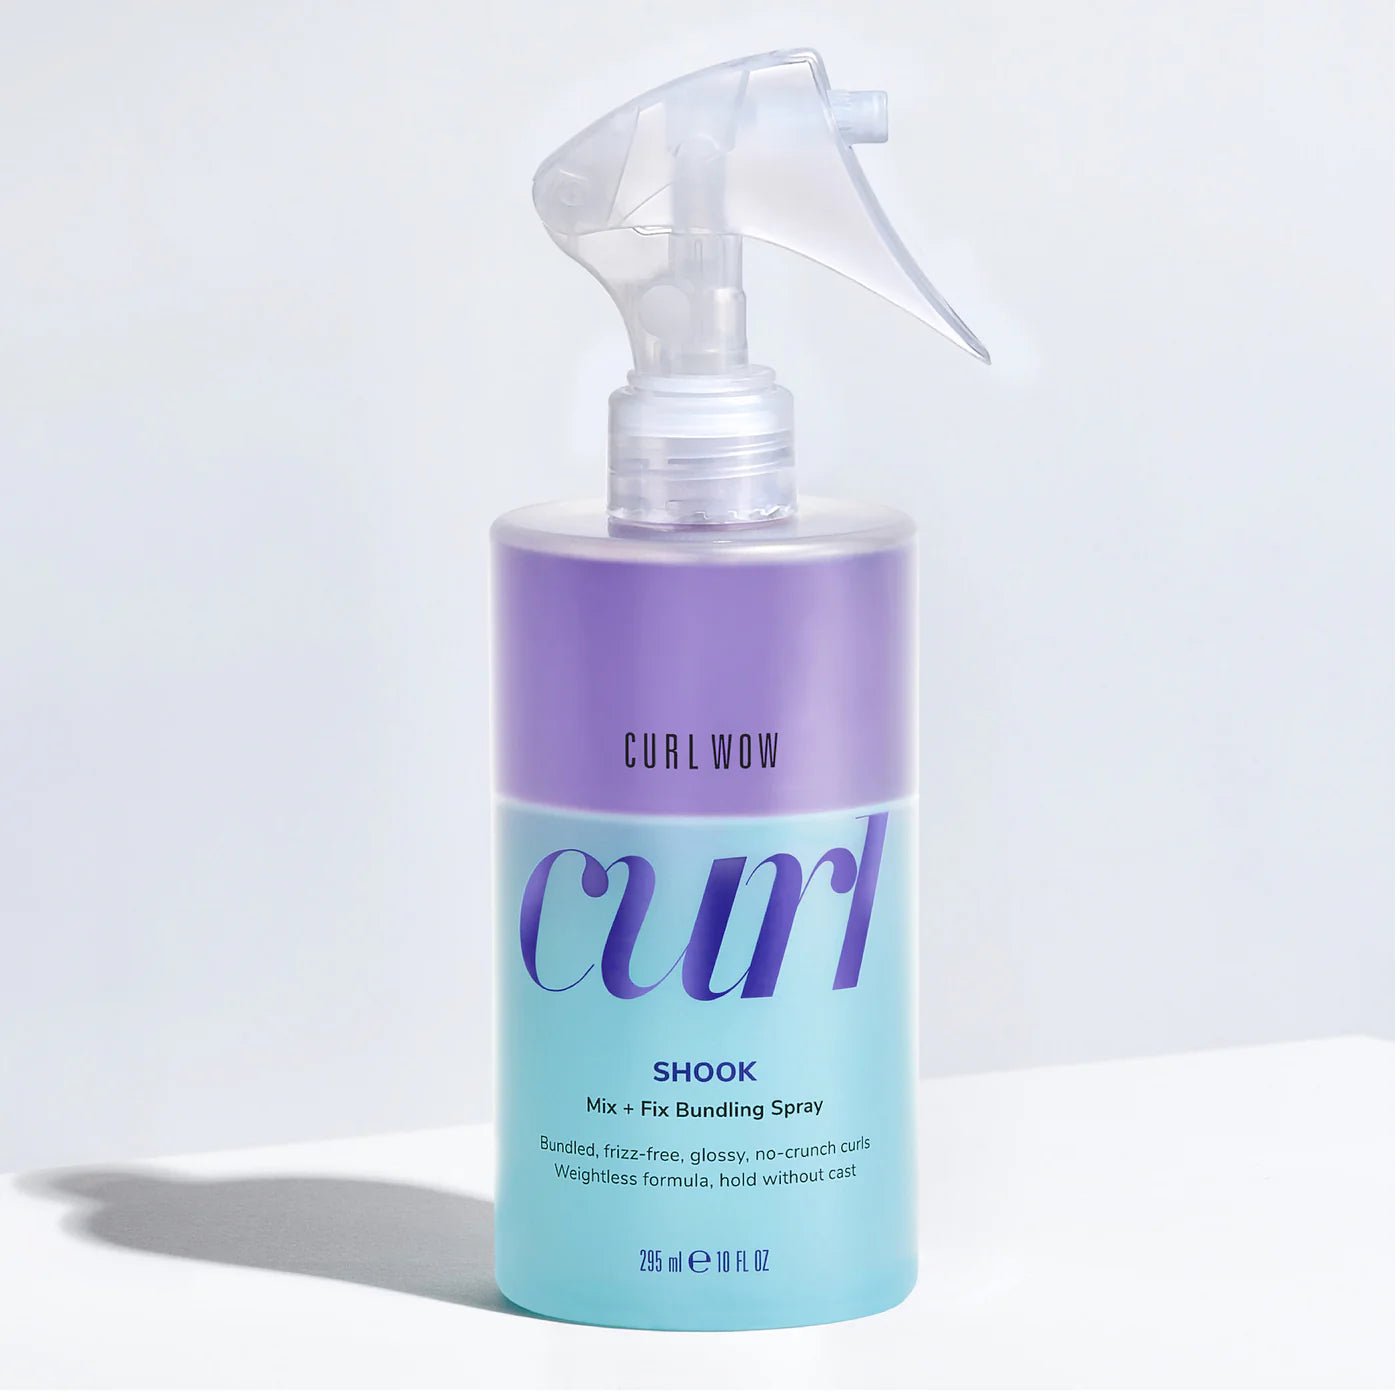 Curl WOW Shook Mix + Fix Bundling Spray 295ml - shelley and co